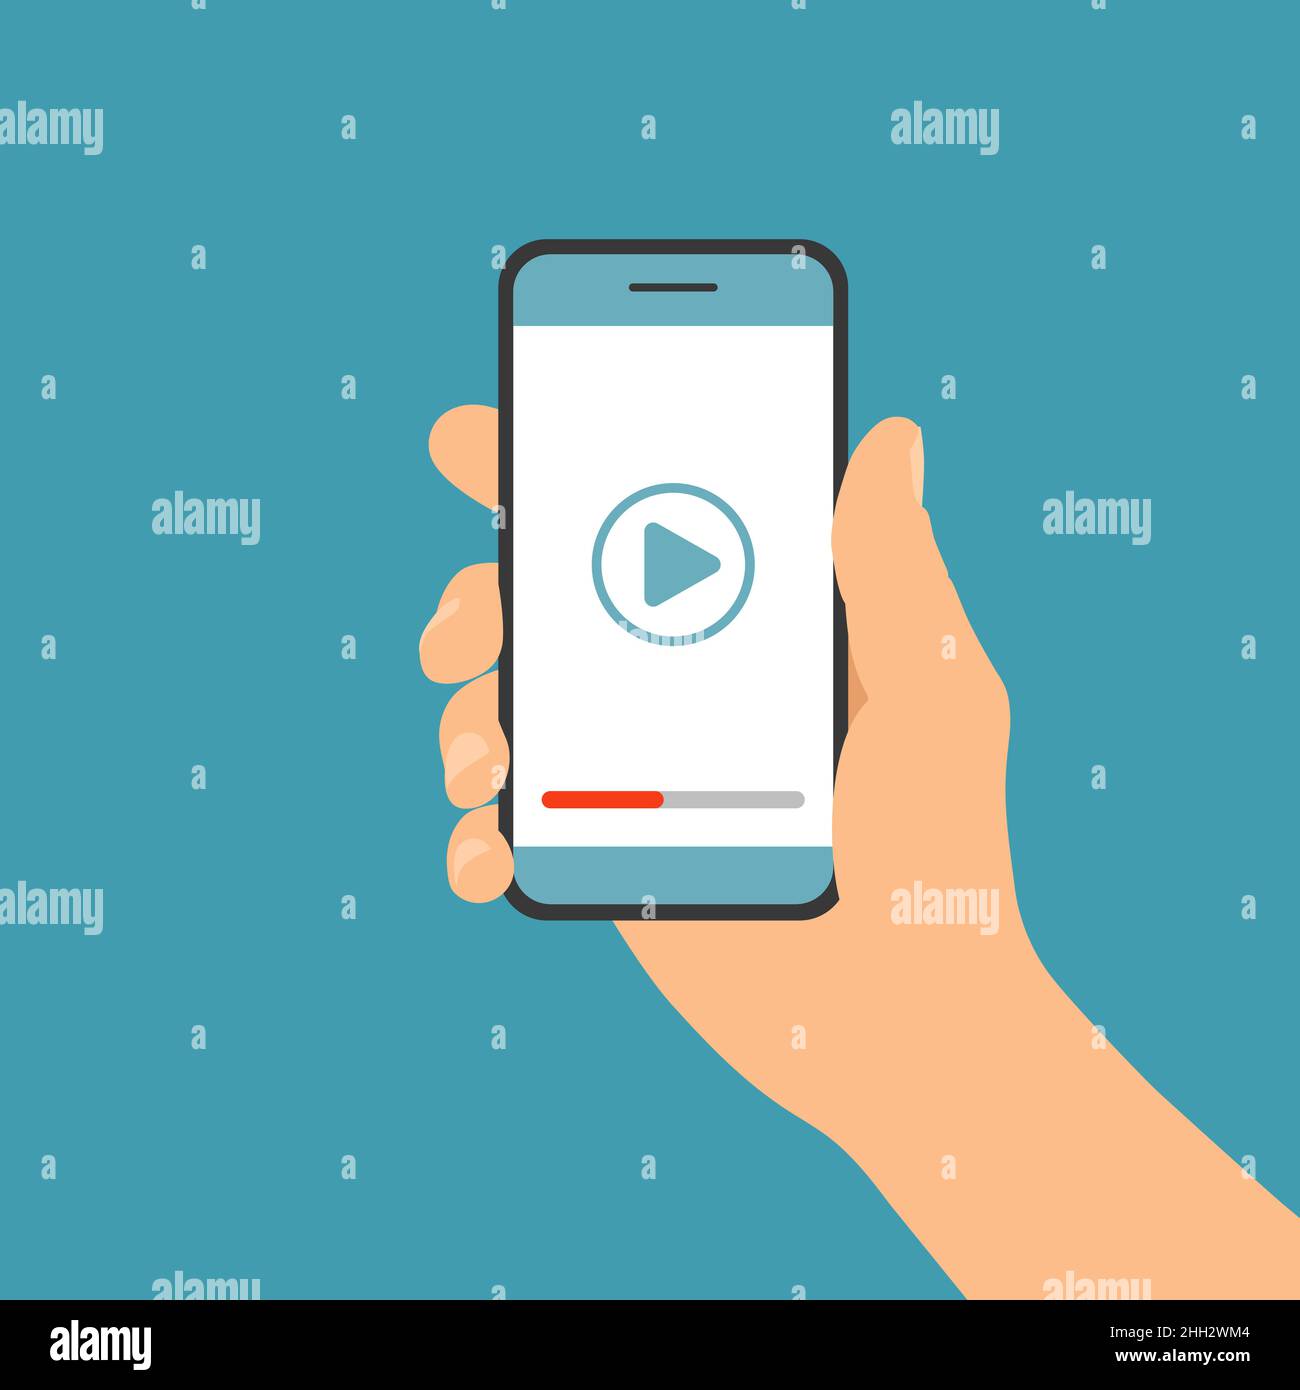 Flat design illustration of male hand holding touch screen mobile phone. Video or media playback on display - vector Stock Vector